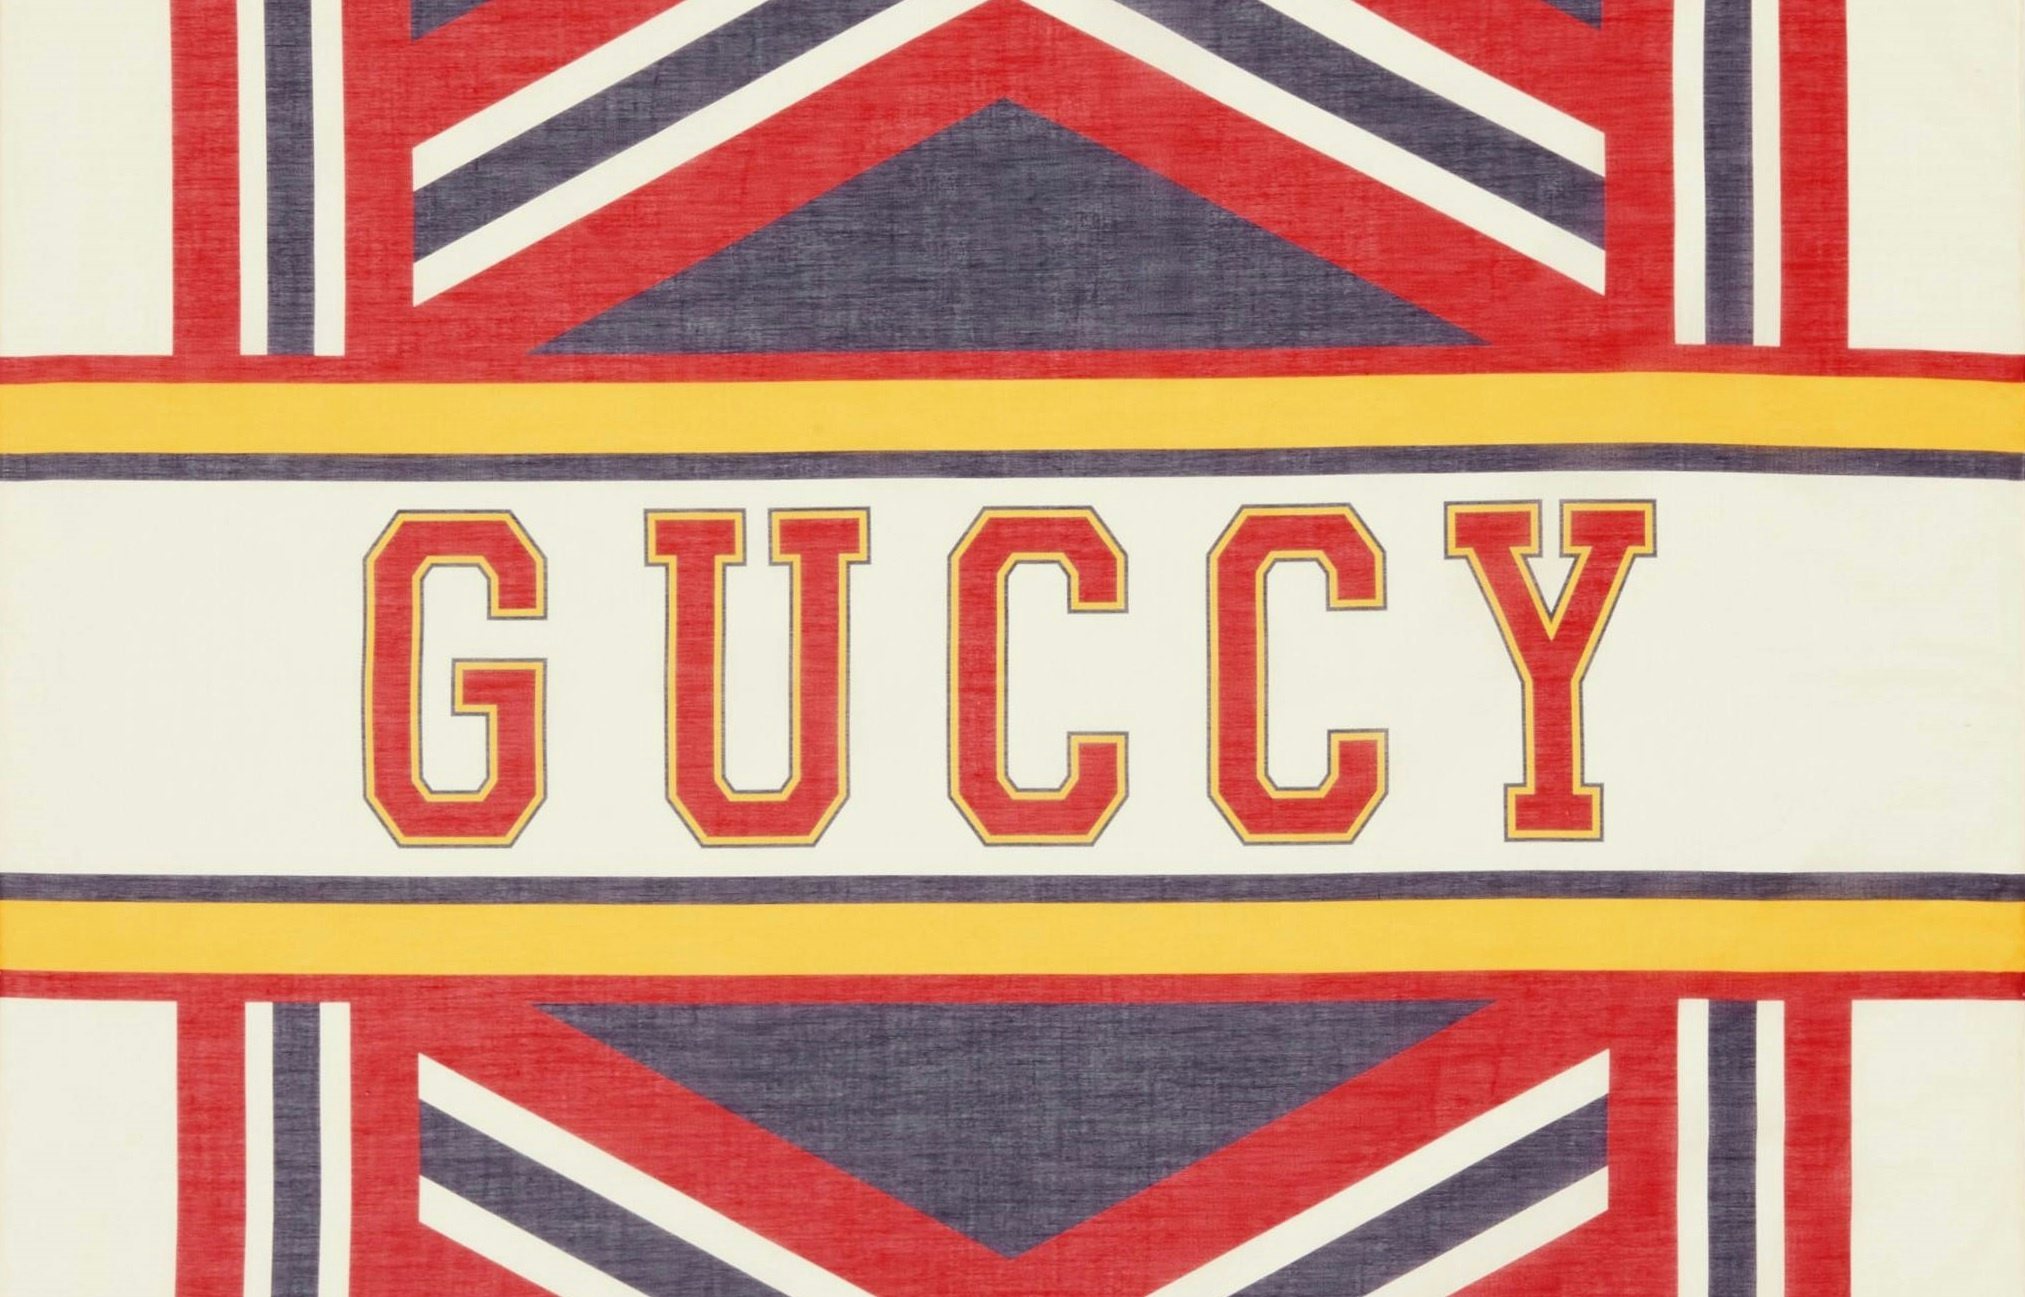 Gucci’s decision to sell a line of “Guccy” products in its spring 2018 resort show, a logo that parodied the luxury industry’s problem with counterfeits, was seen as quite witty by Chinese consumers. Photo: brand's website